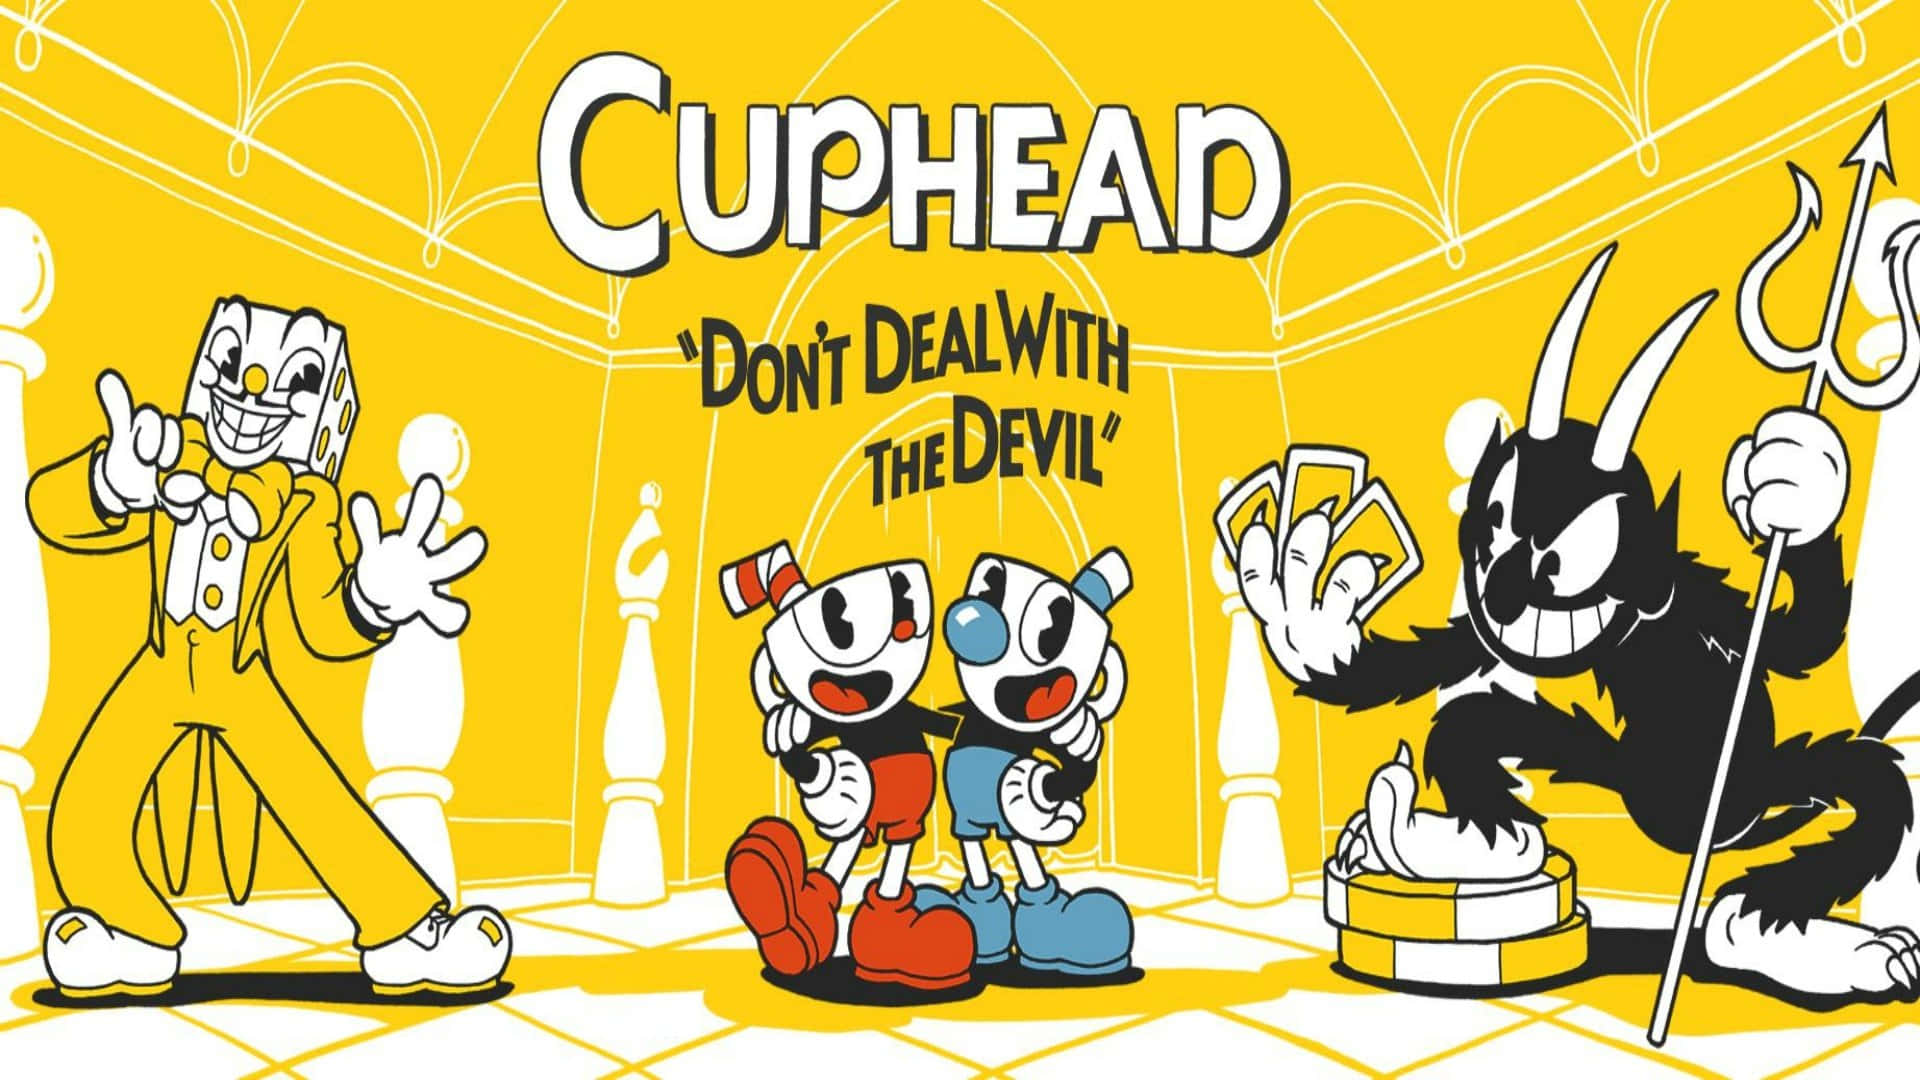 Cuphead, the video game that redefines difficulty